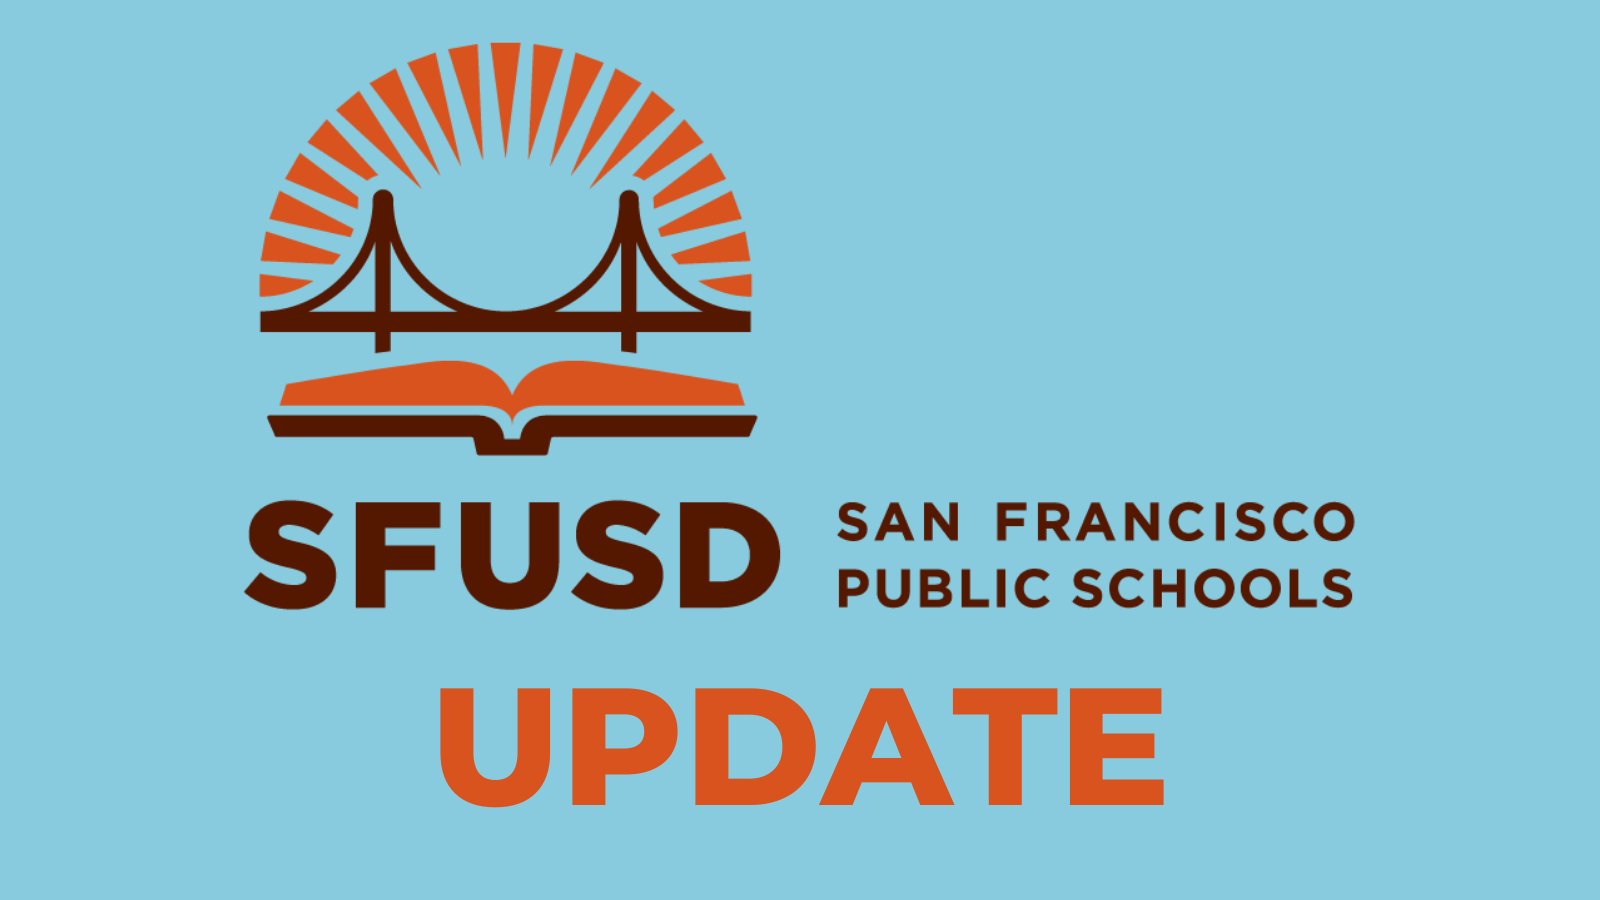 Sfusd Calendar 2022 Sf Public Schools On Twitter: "The 2021-2022 Academic Calendar Is Available  Now. Https://T.co/Svq7Peo26B Https://T.co/C7Woiwegql" / Twitter